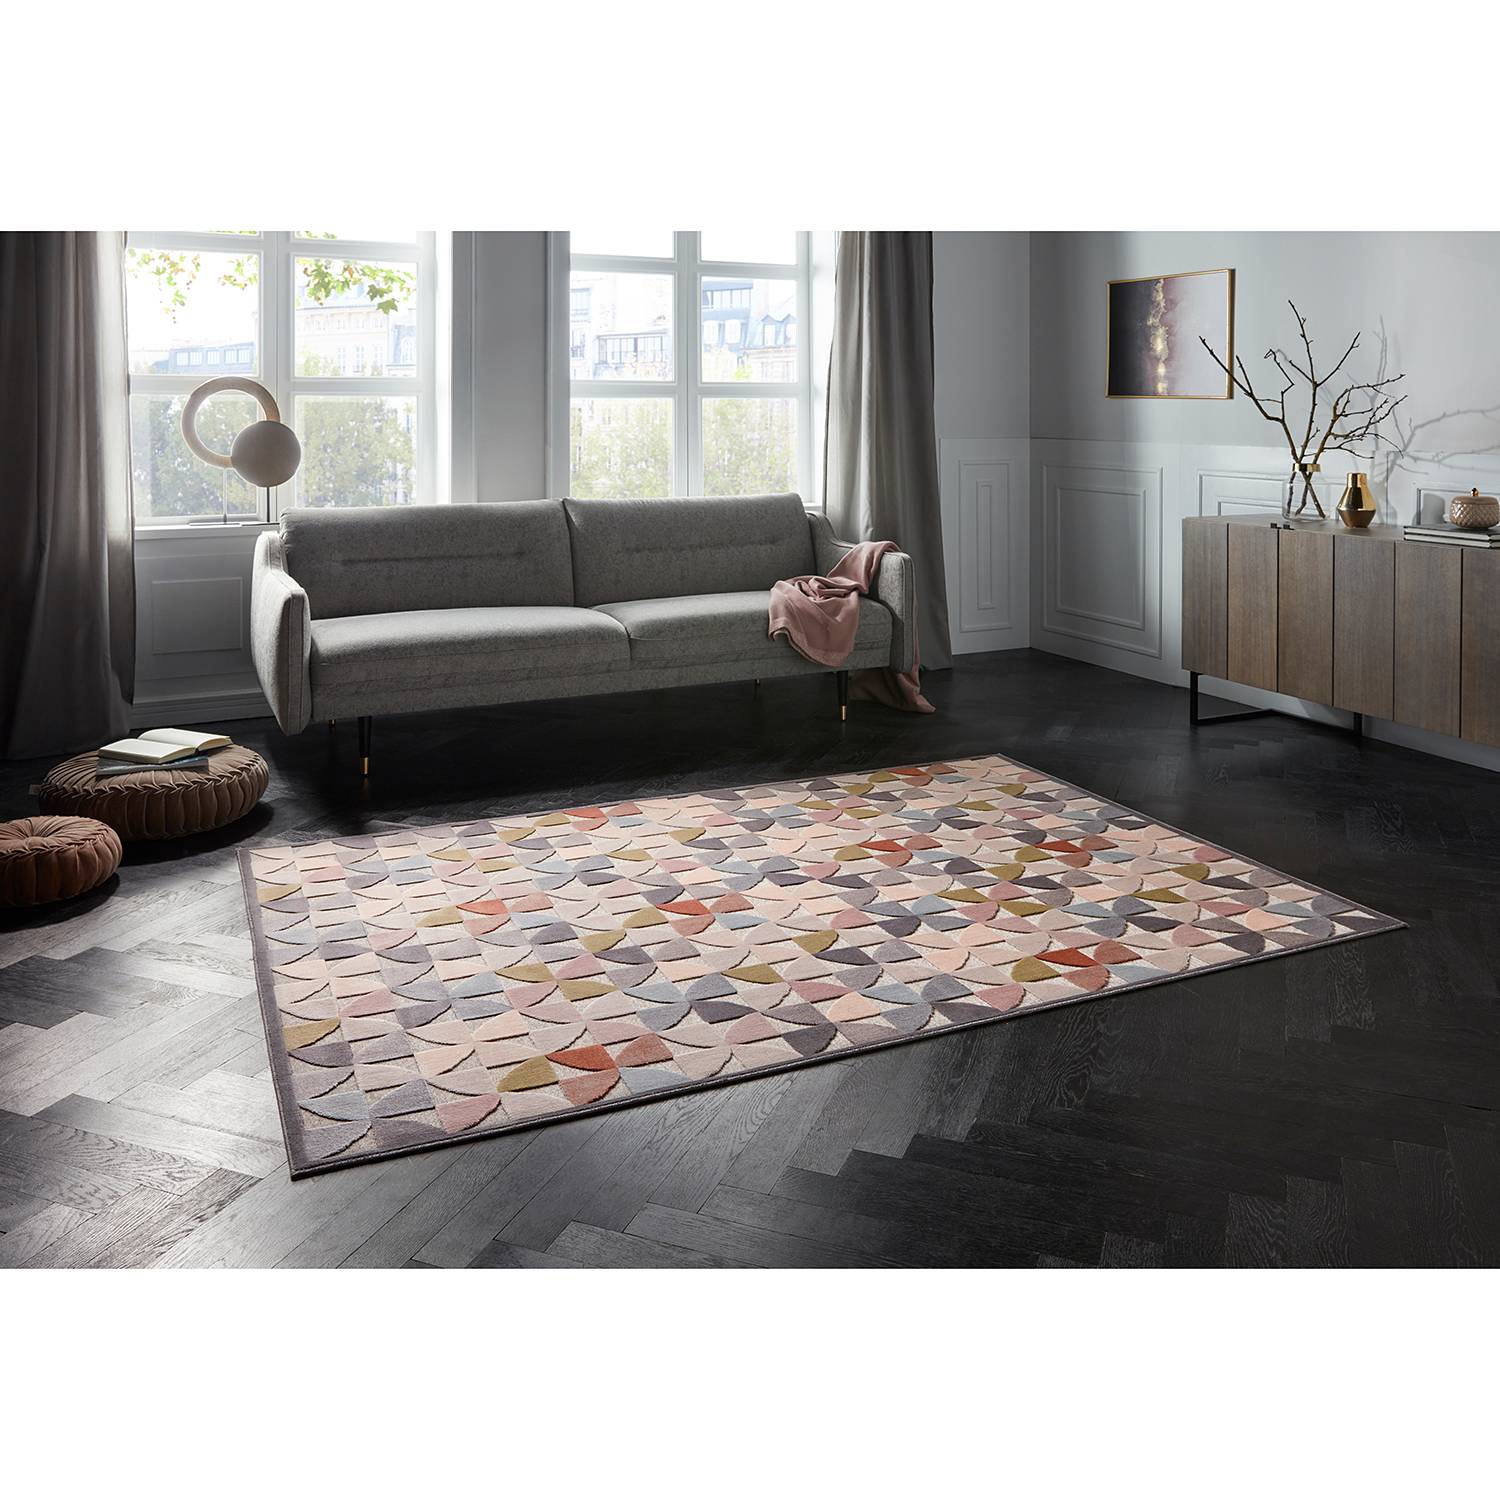 Image of Tapis Ailette 000000001000193677